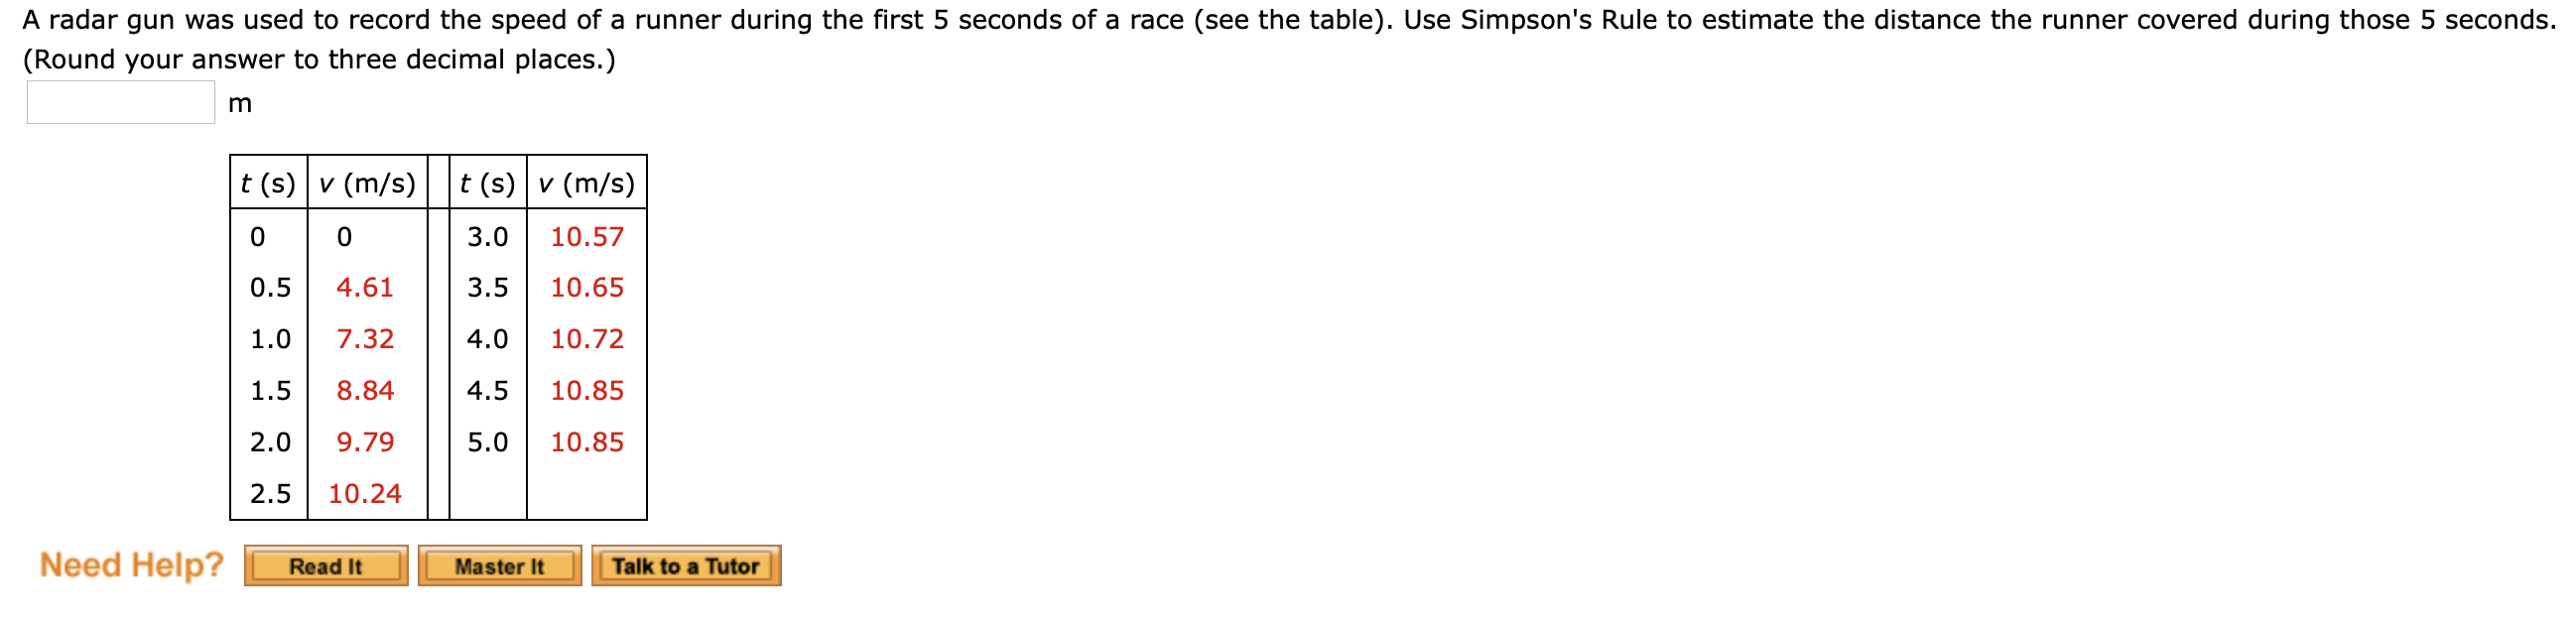 A radar gun was used to record the speed of a runner during the first 5 seconds of a race (see the table). Use Simpson's Rule to estimate the distance the runner covered during those 5 seconds.
(Round your answer to three decimal places.)
t (s) v (m/s)
t (s) v (m/s)
3.0
10.57
0.5
4.61
3.5
10.65
1.0
7.32
4.0
10.72
1.5
8.84
4.5
10.85
2.0
9.79
5.0
10.85
2.5
10.24
